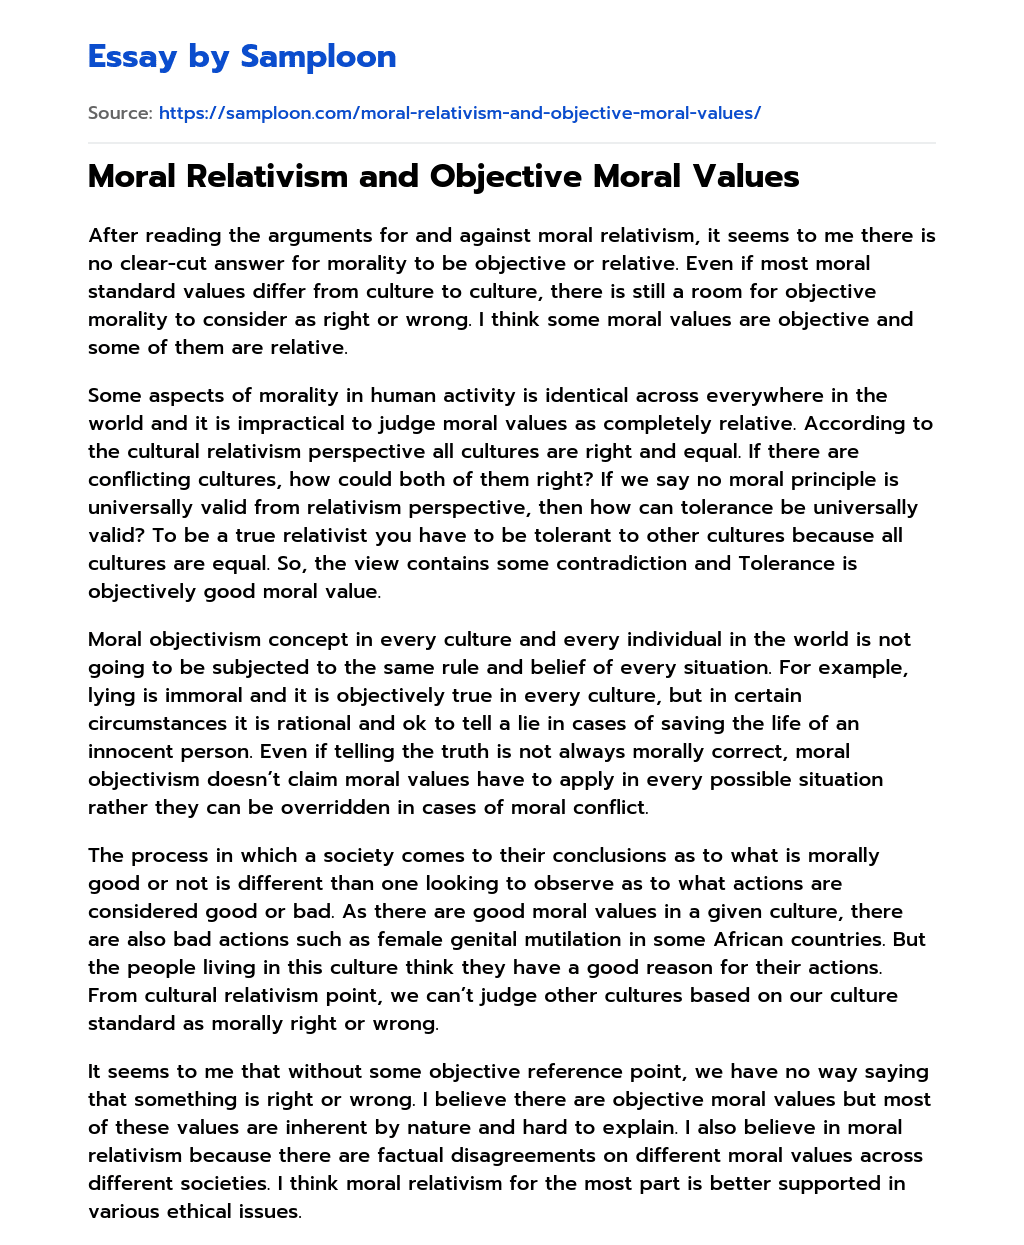 Moral Relativism and Objective Moral Values essay